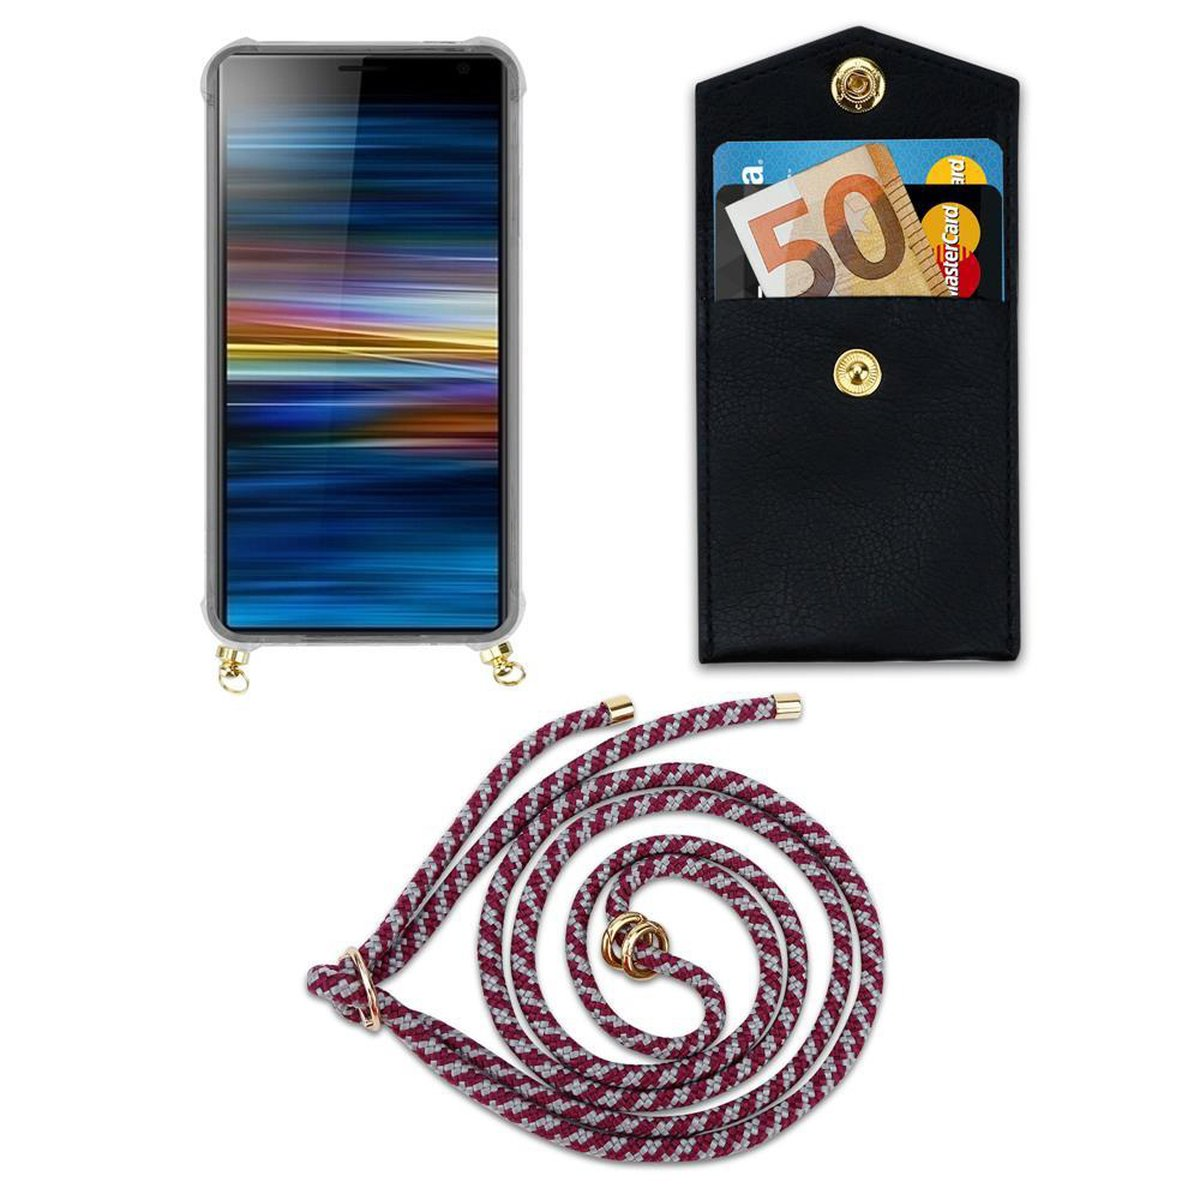 Band Sony, 10 abnehmbarer ROT mit Kette WEIß Backcover, und Ringen, CADORABO Handy Gold PLUS, Kordel Xperia Hülle,